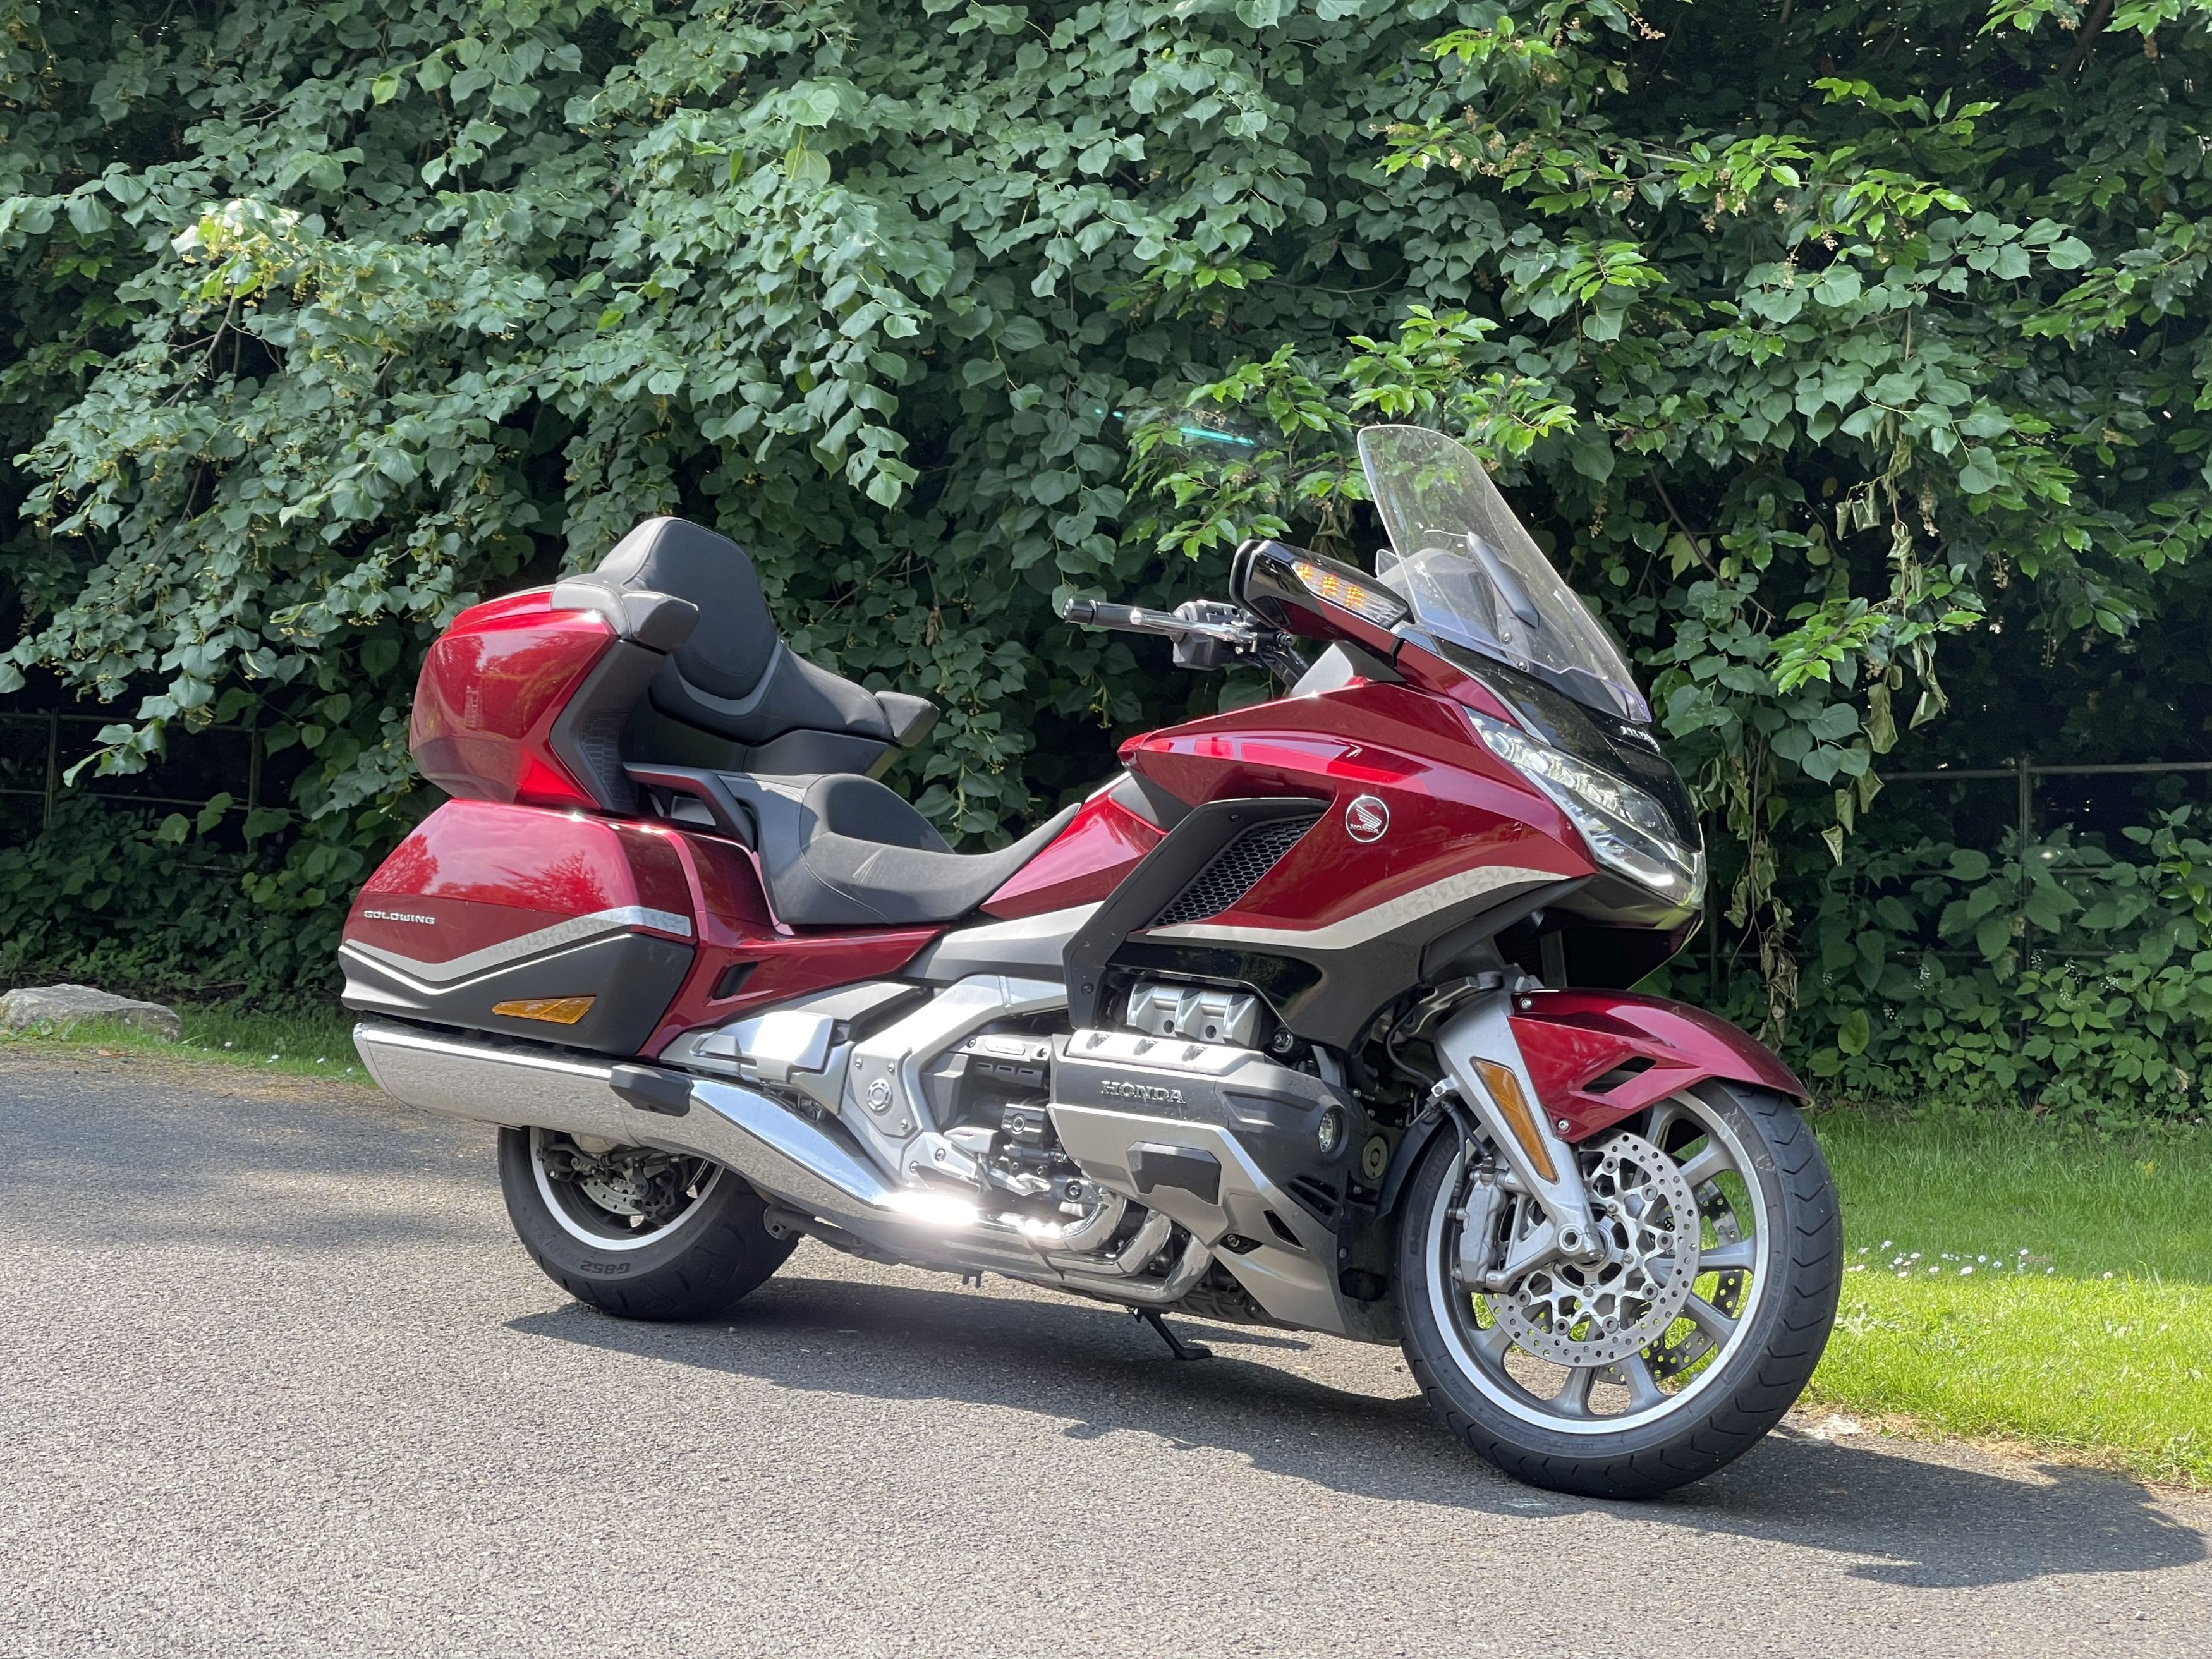 Honda GL1800 Gold Wing (2021) Road Test and Touring Review